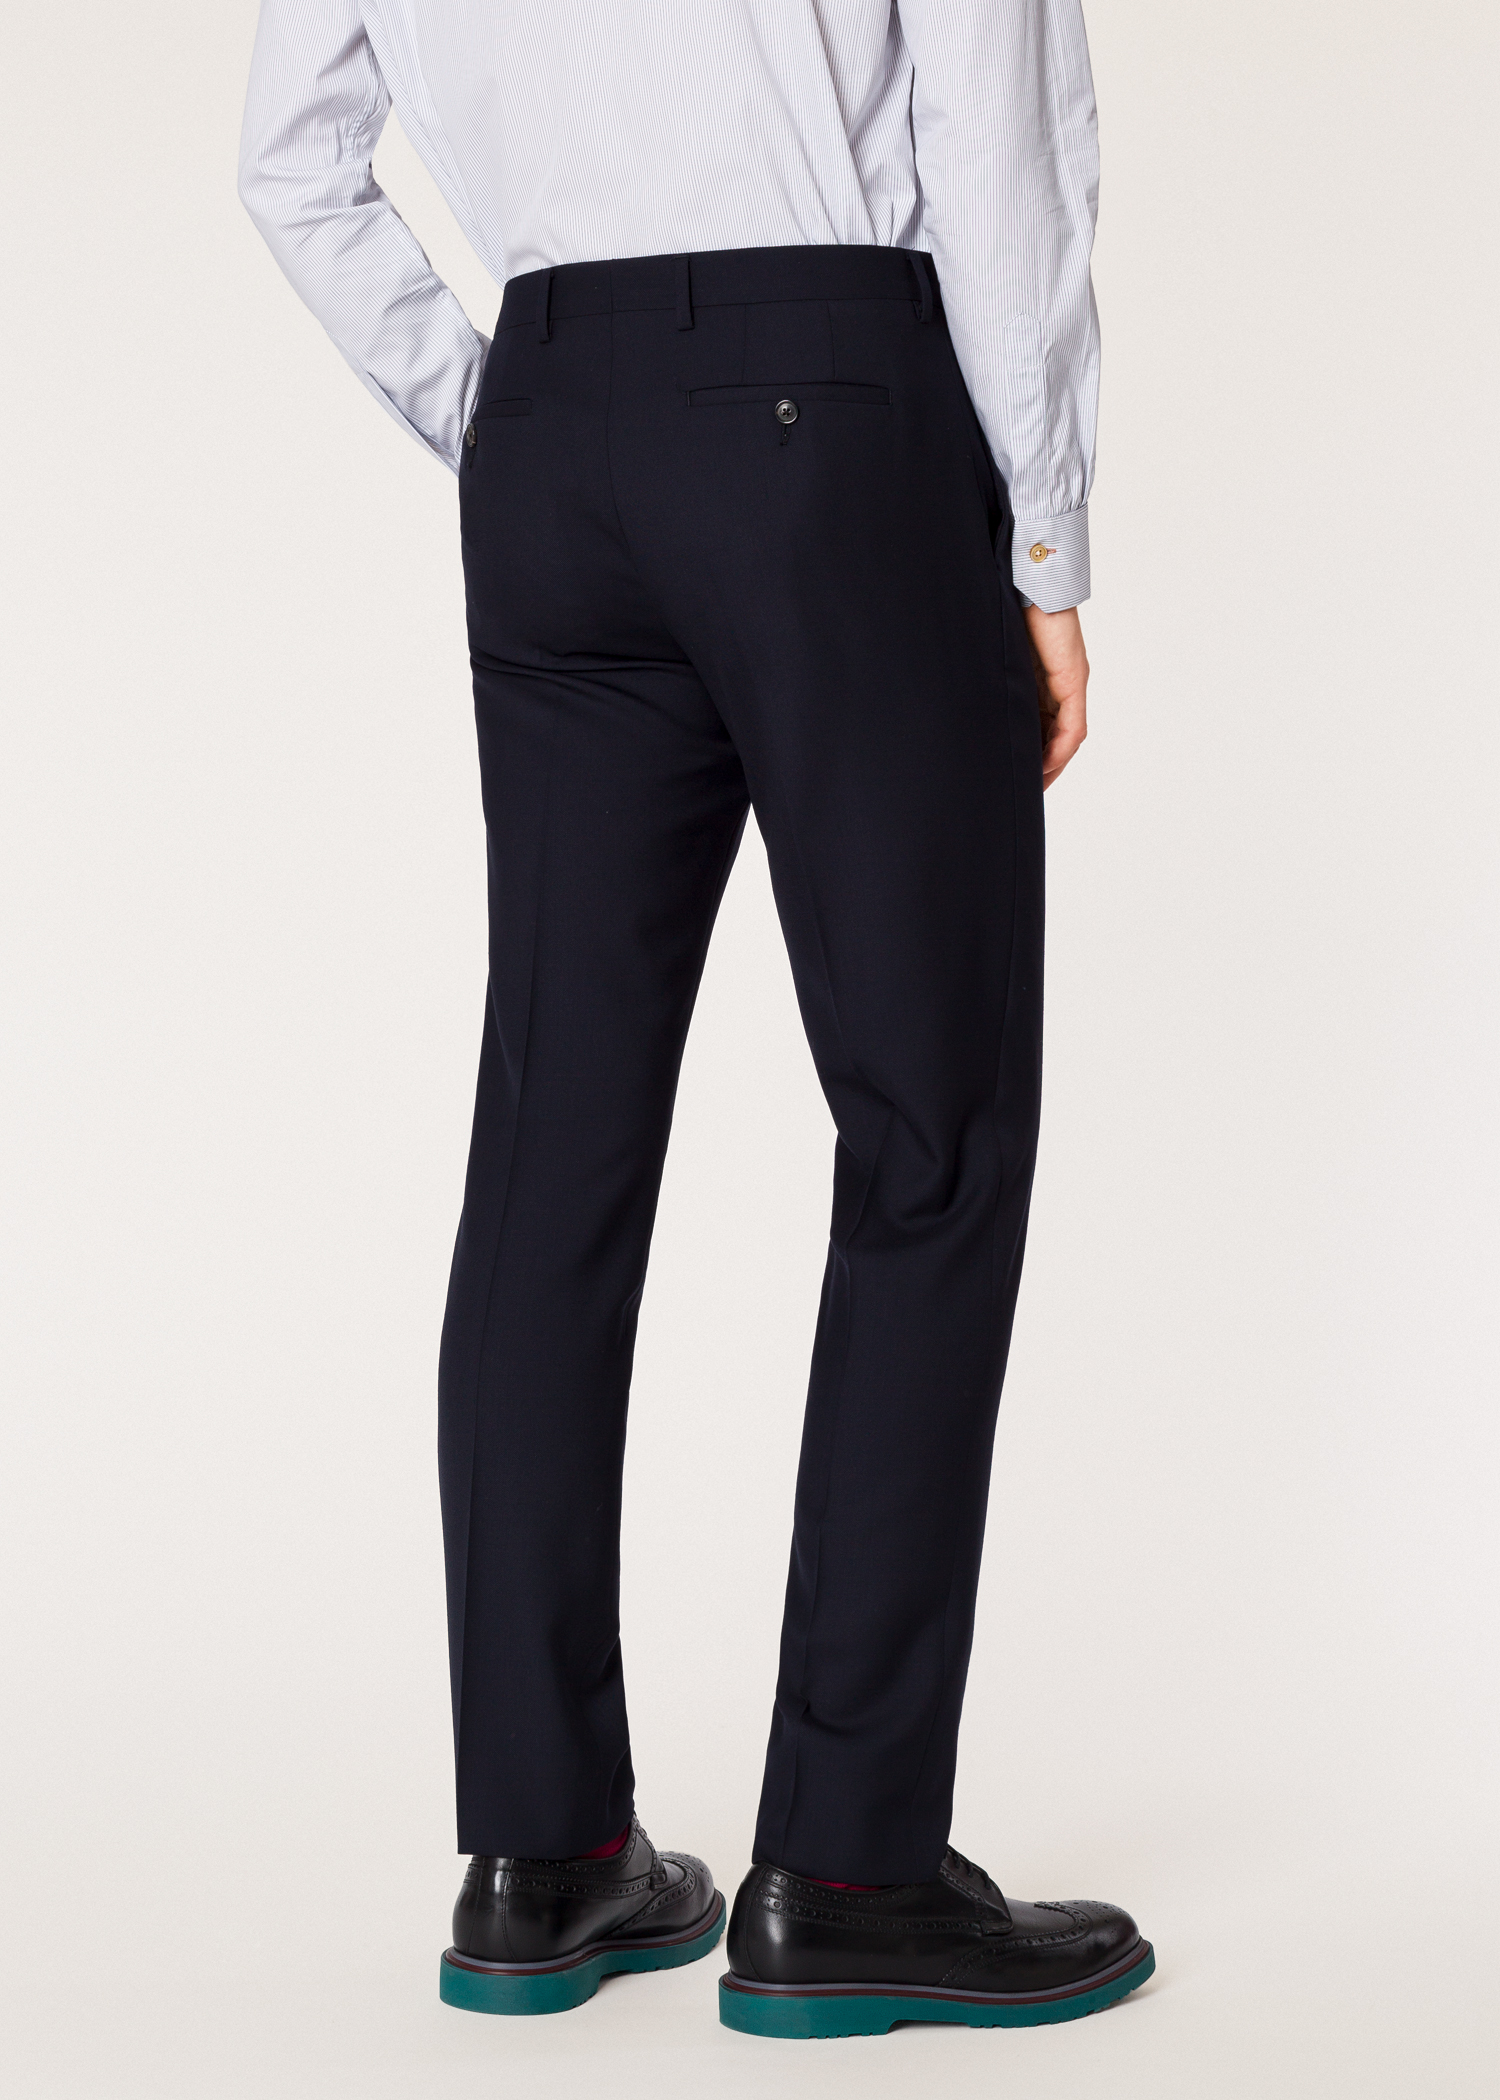 The Soho - Men's Tailored-Fit Navy Wool 'A Suit To Travel In' - Paul ...